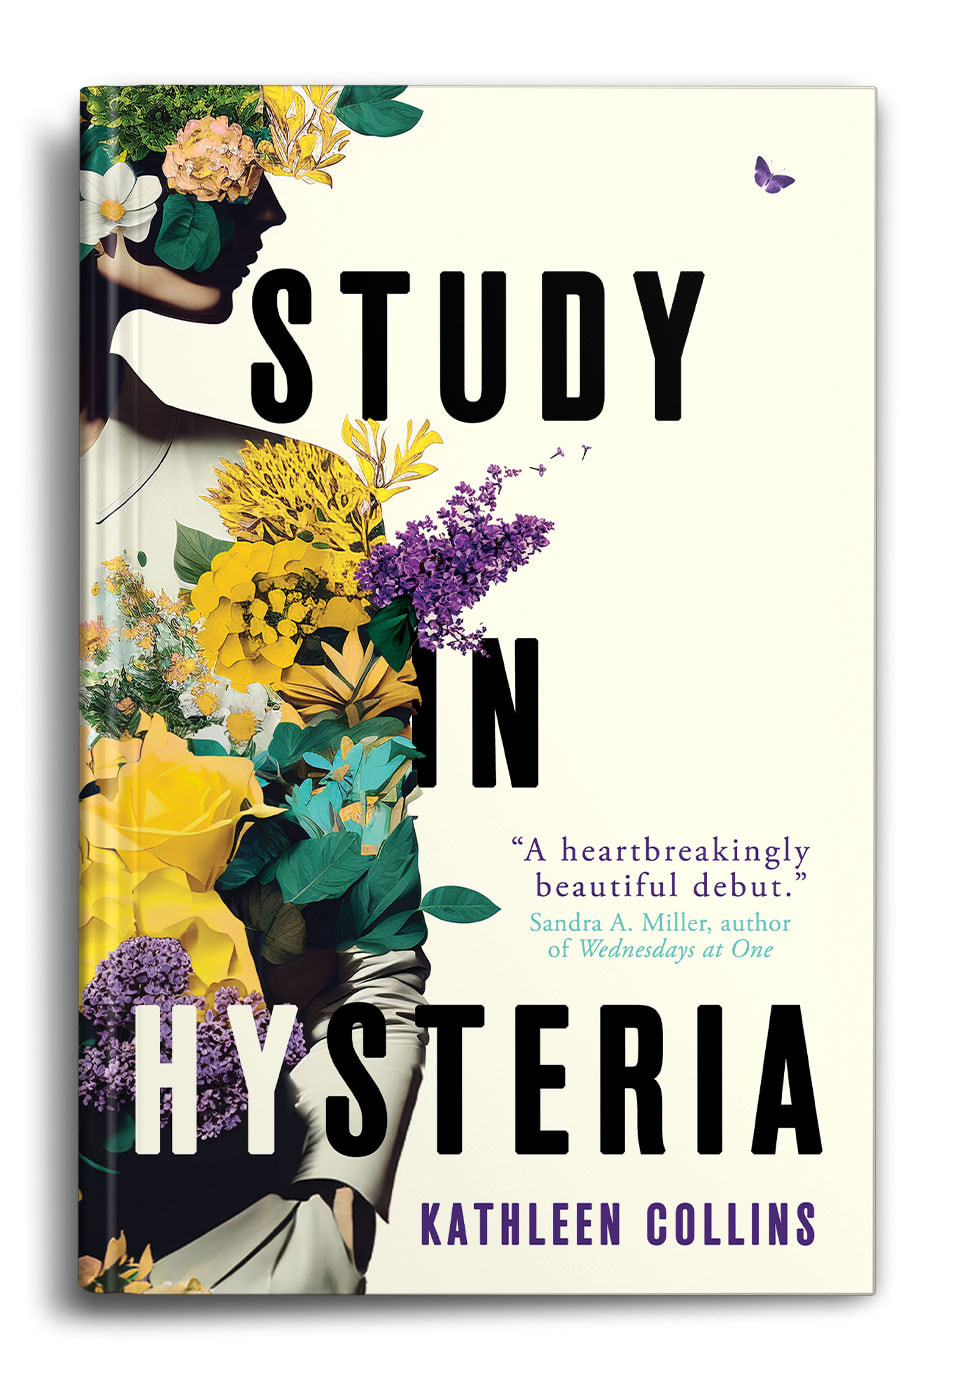 Study in Hysteria by Kathleen Collins